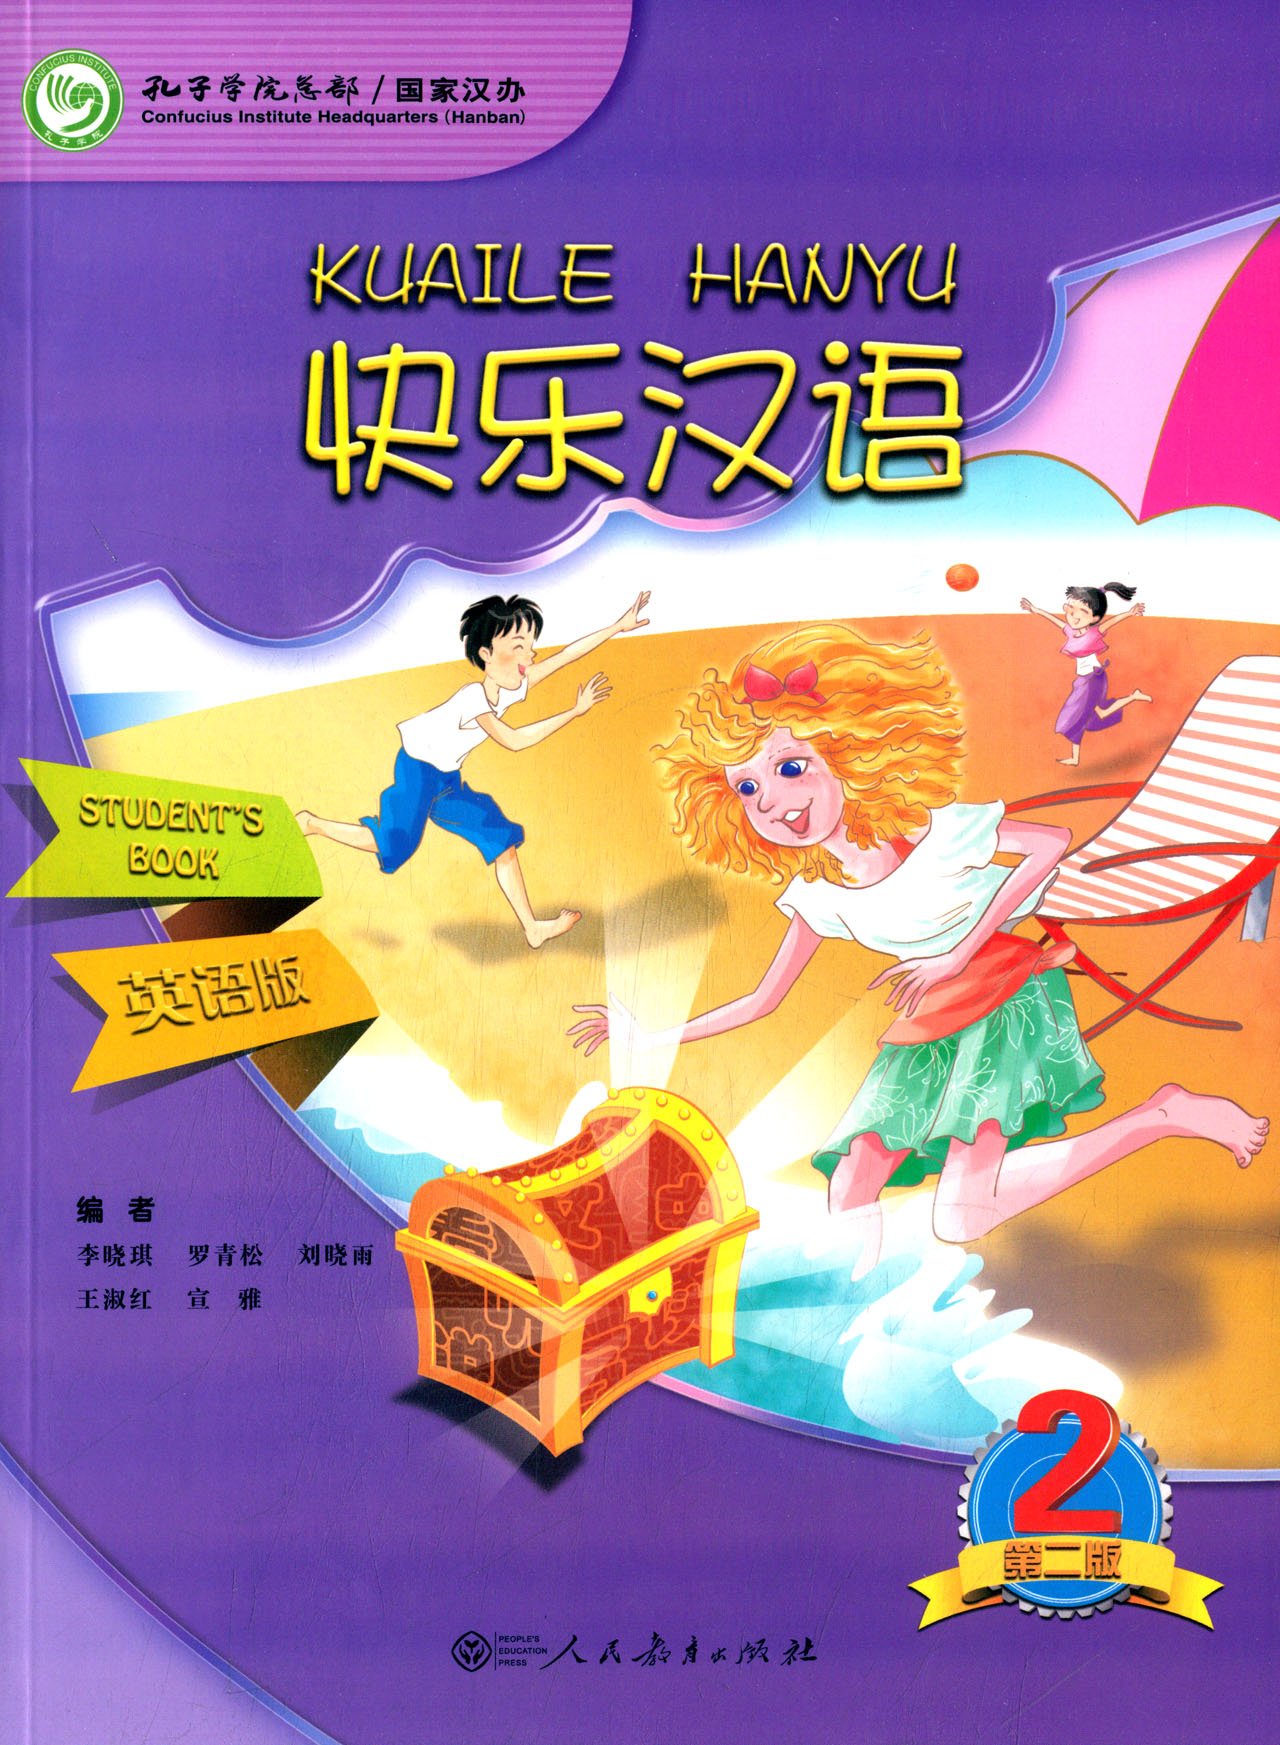 Title: Happy Chinese 2 (Second Edition) (Student's Book) 快乐汉语 